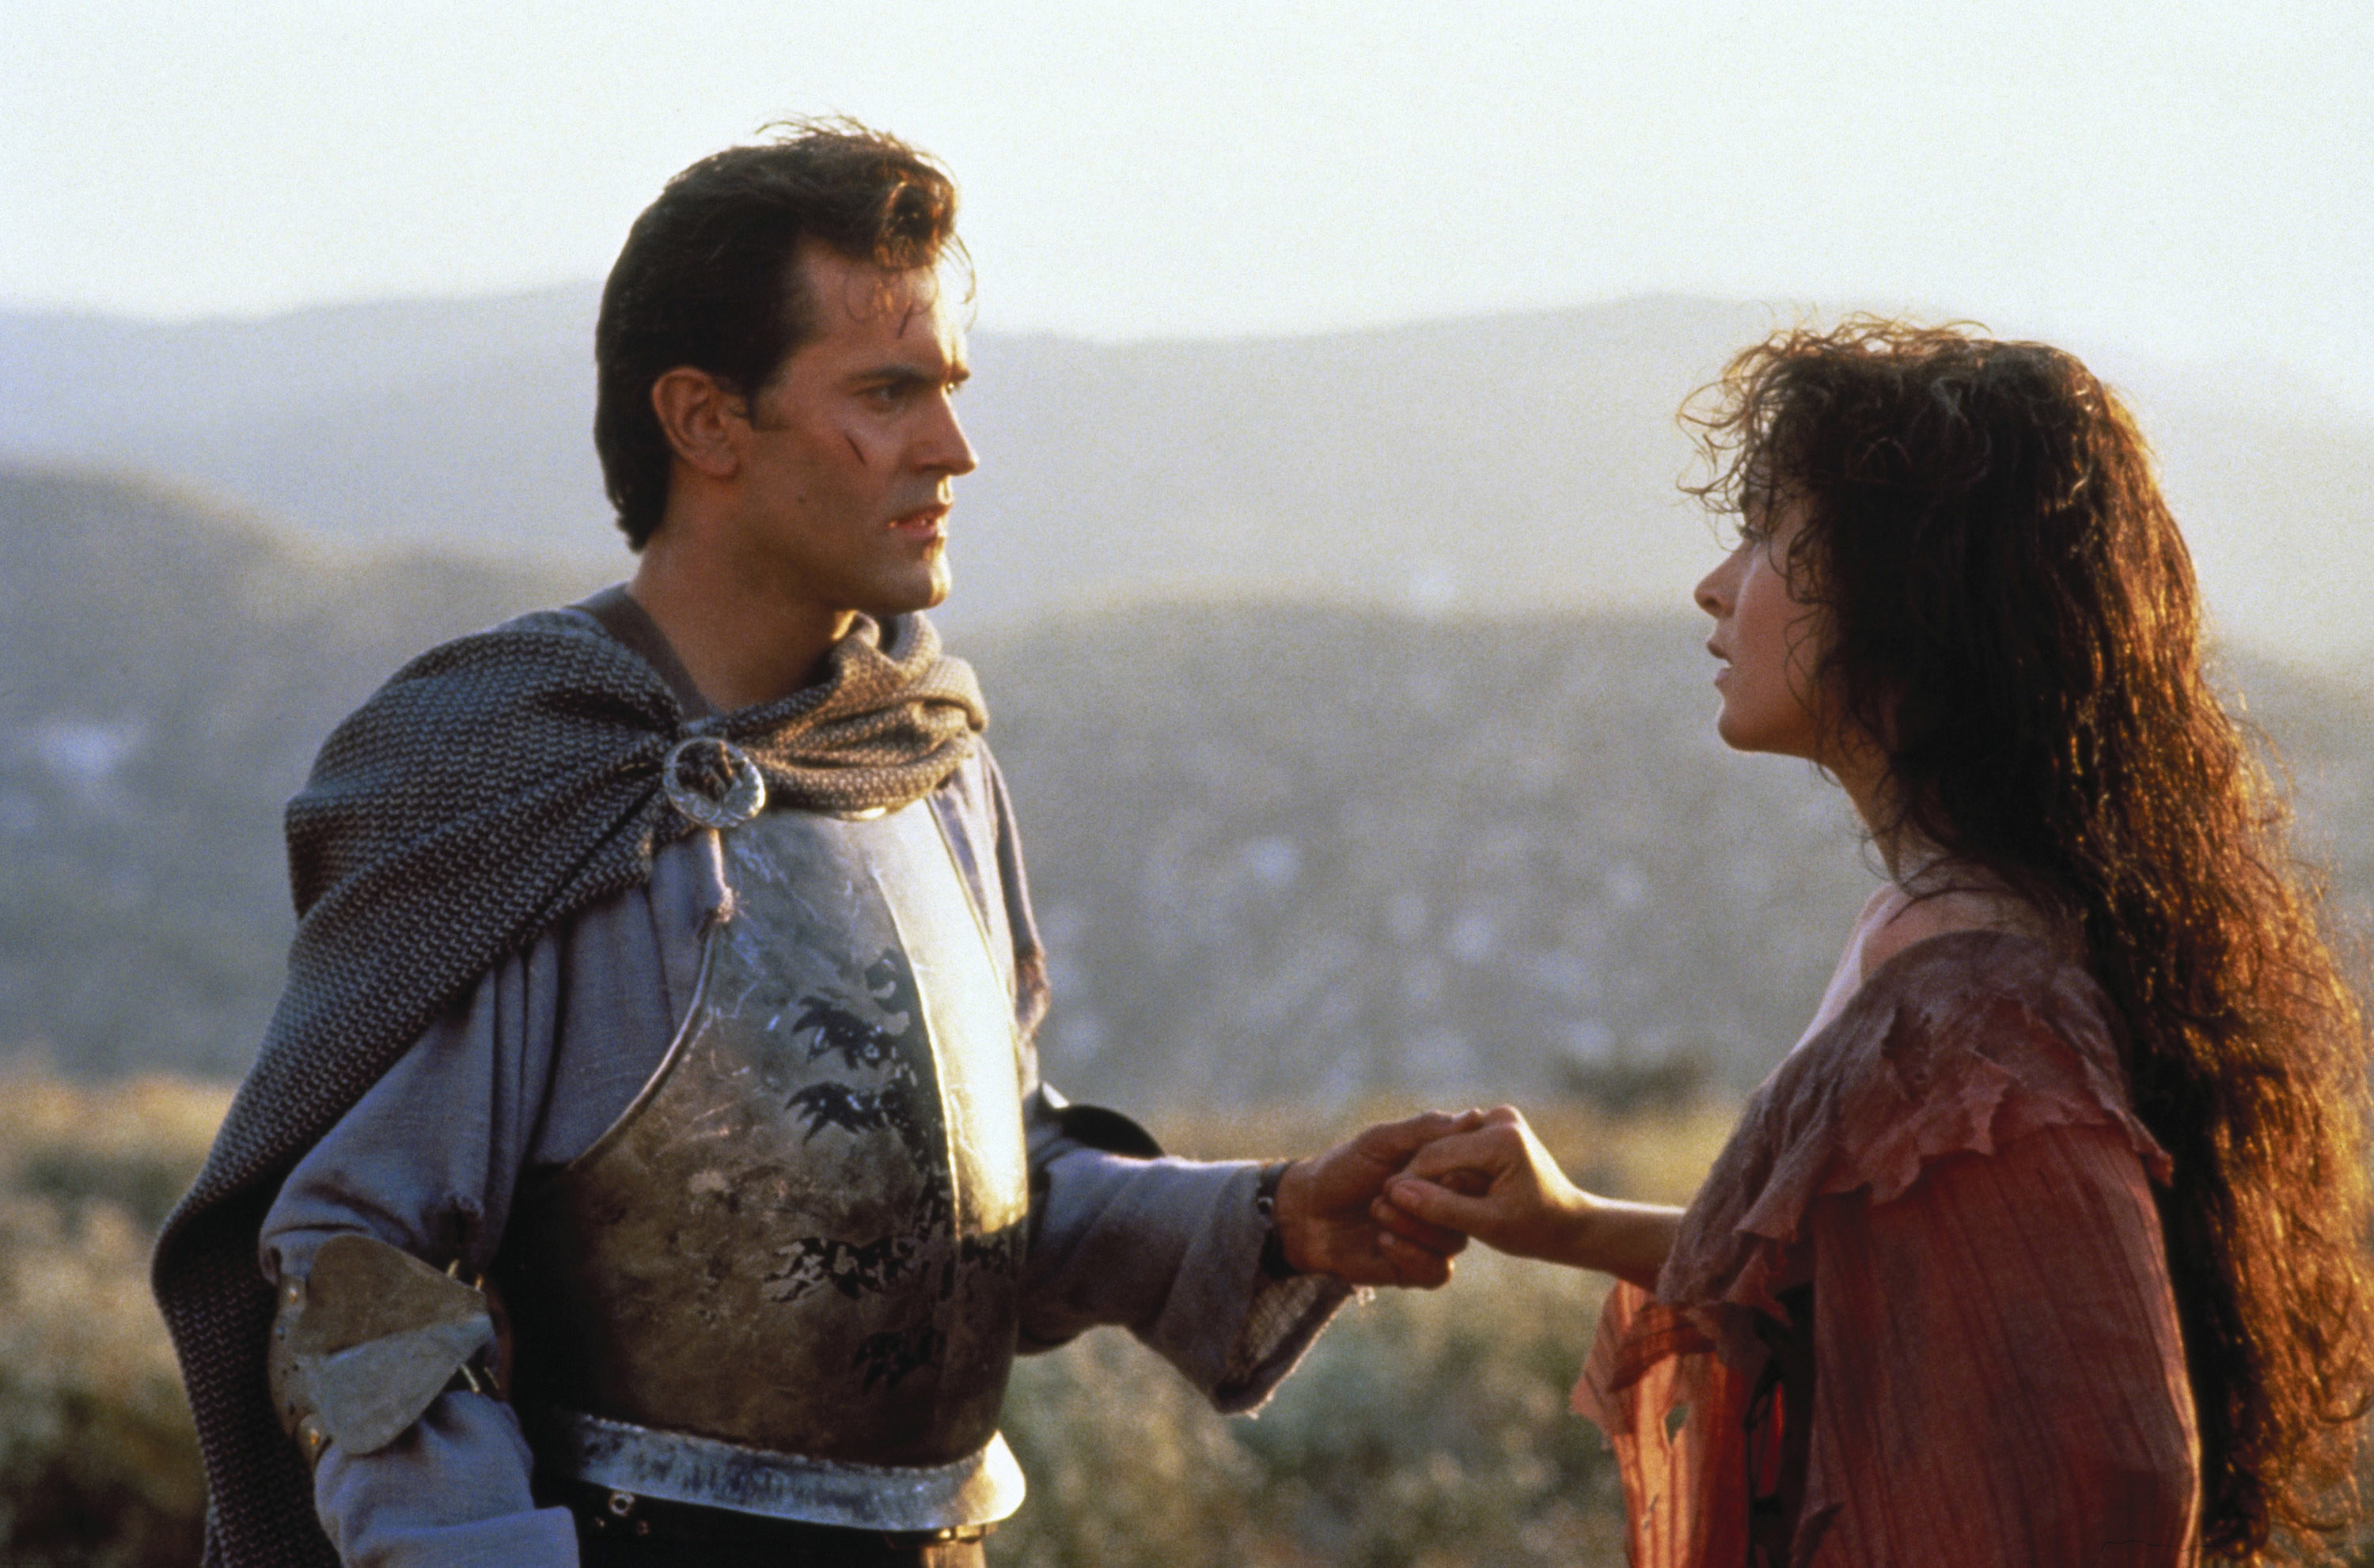 Bruce Campbell and Embeth Davidtz holding hands.